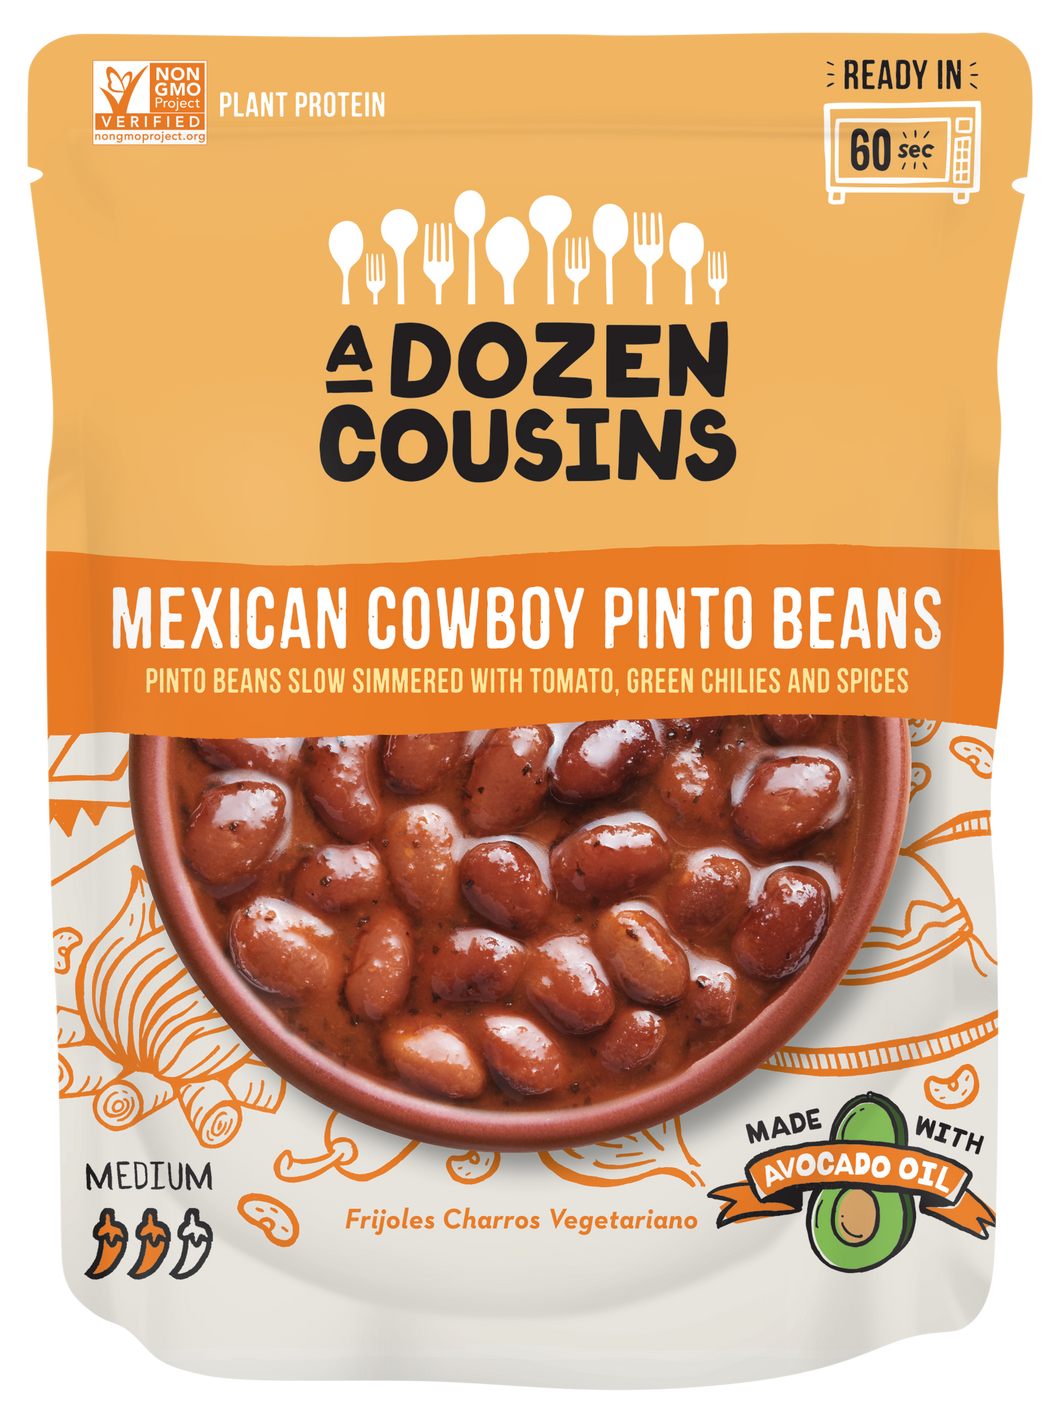 Mexican Pinto Beans